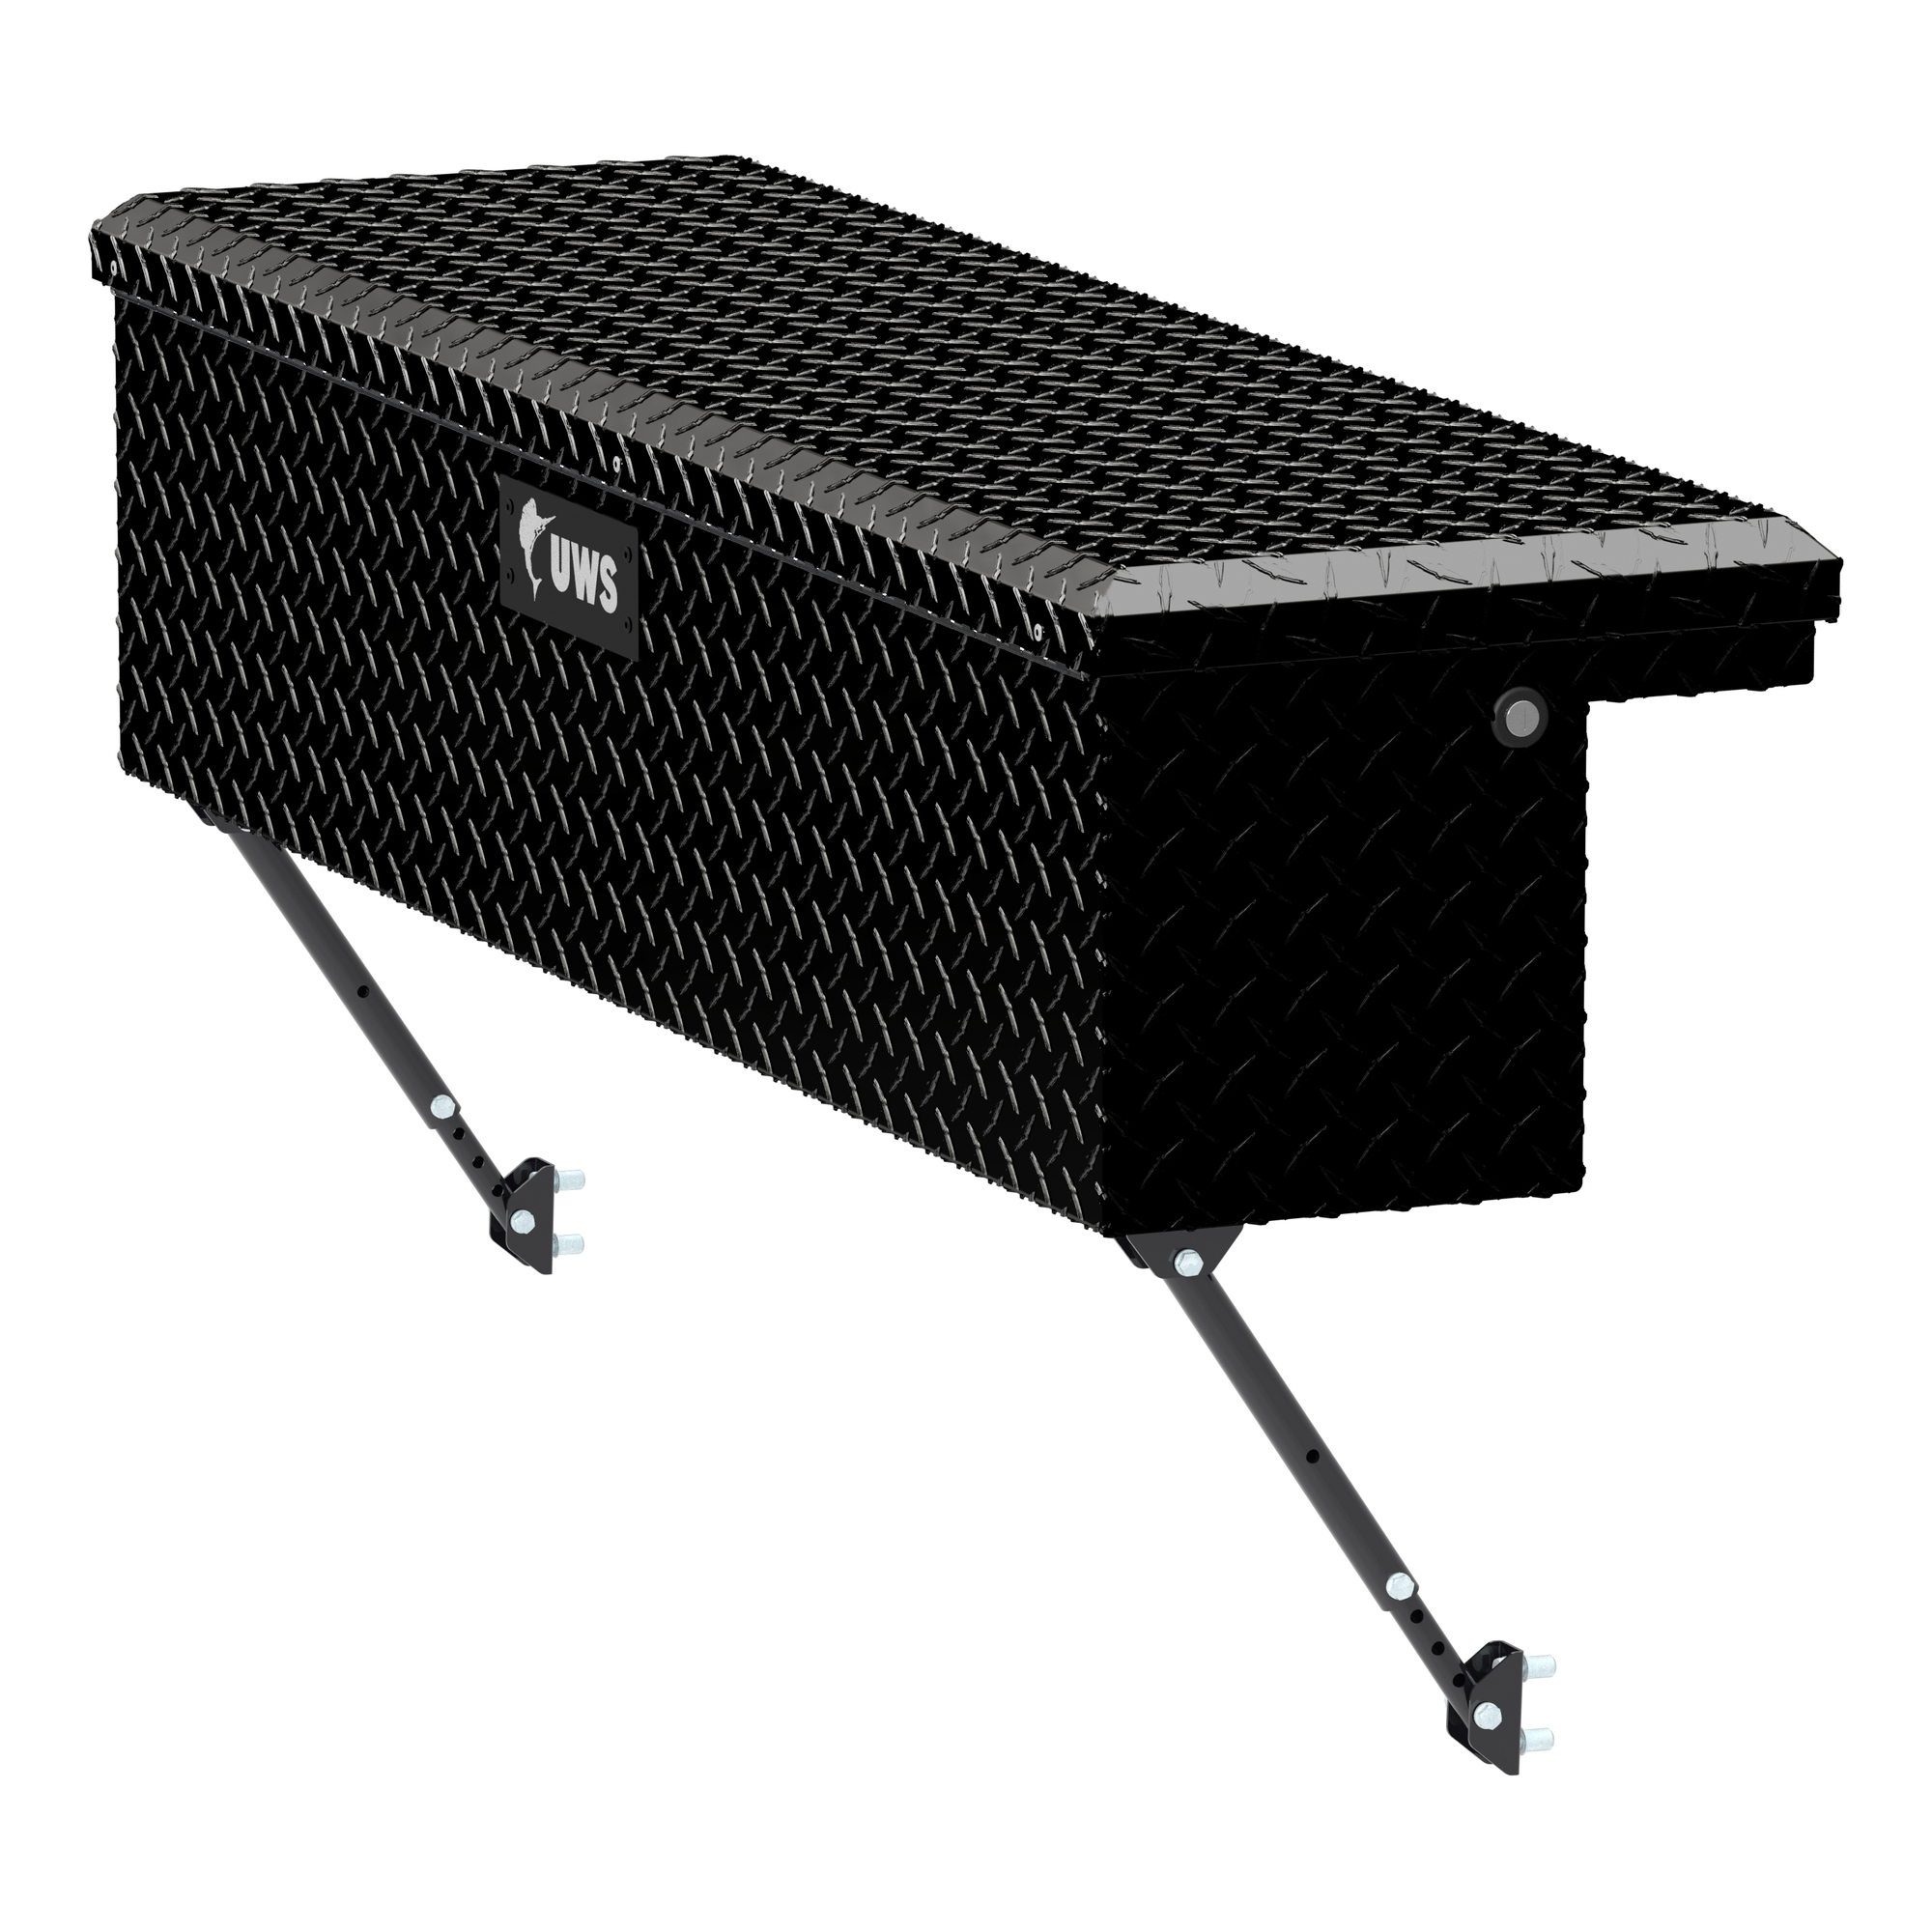 UWS, 48Inch Truck Side Tool Box with Low Profile, Width 48.875 in, Material Aluminum, Color Finish Gloss Black, Model EC30202-MK2